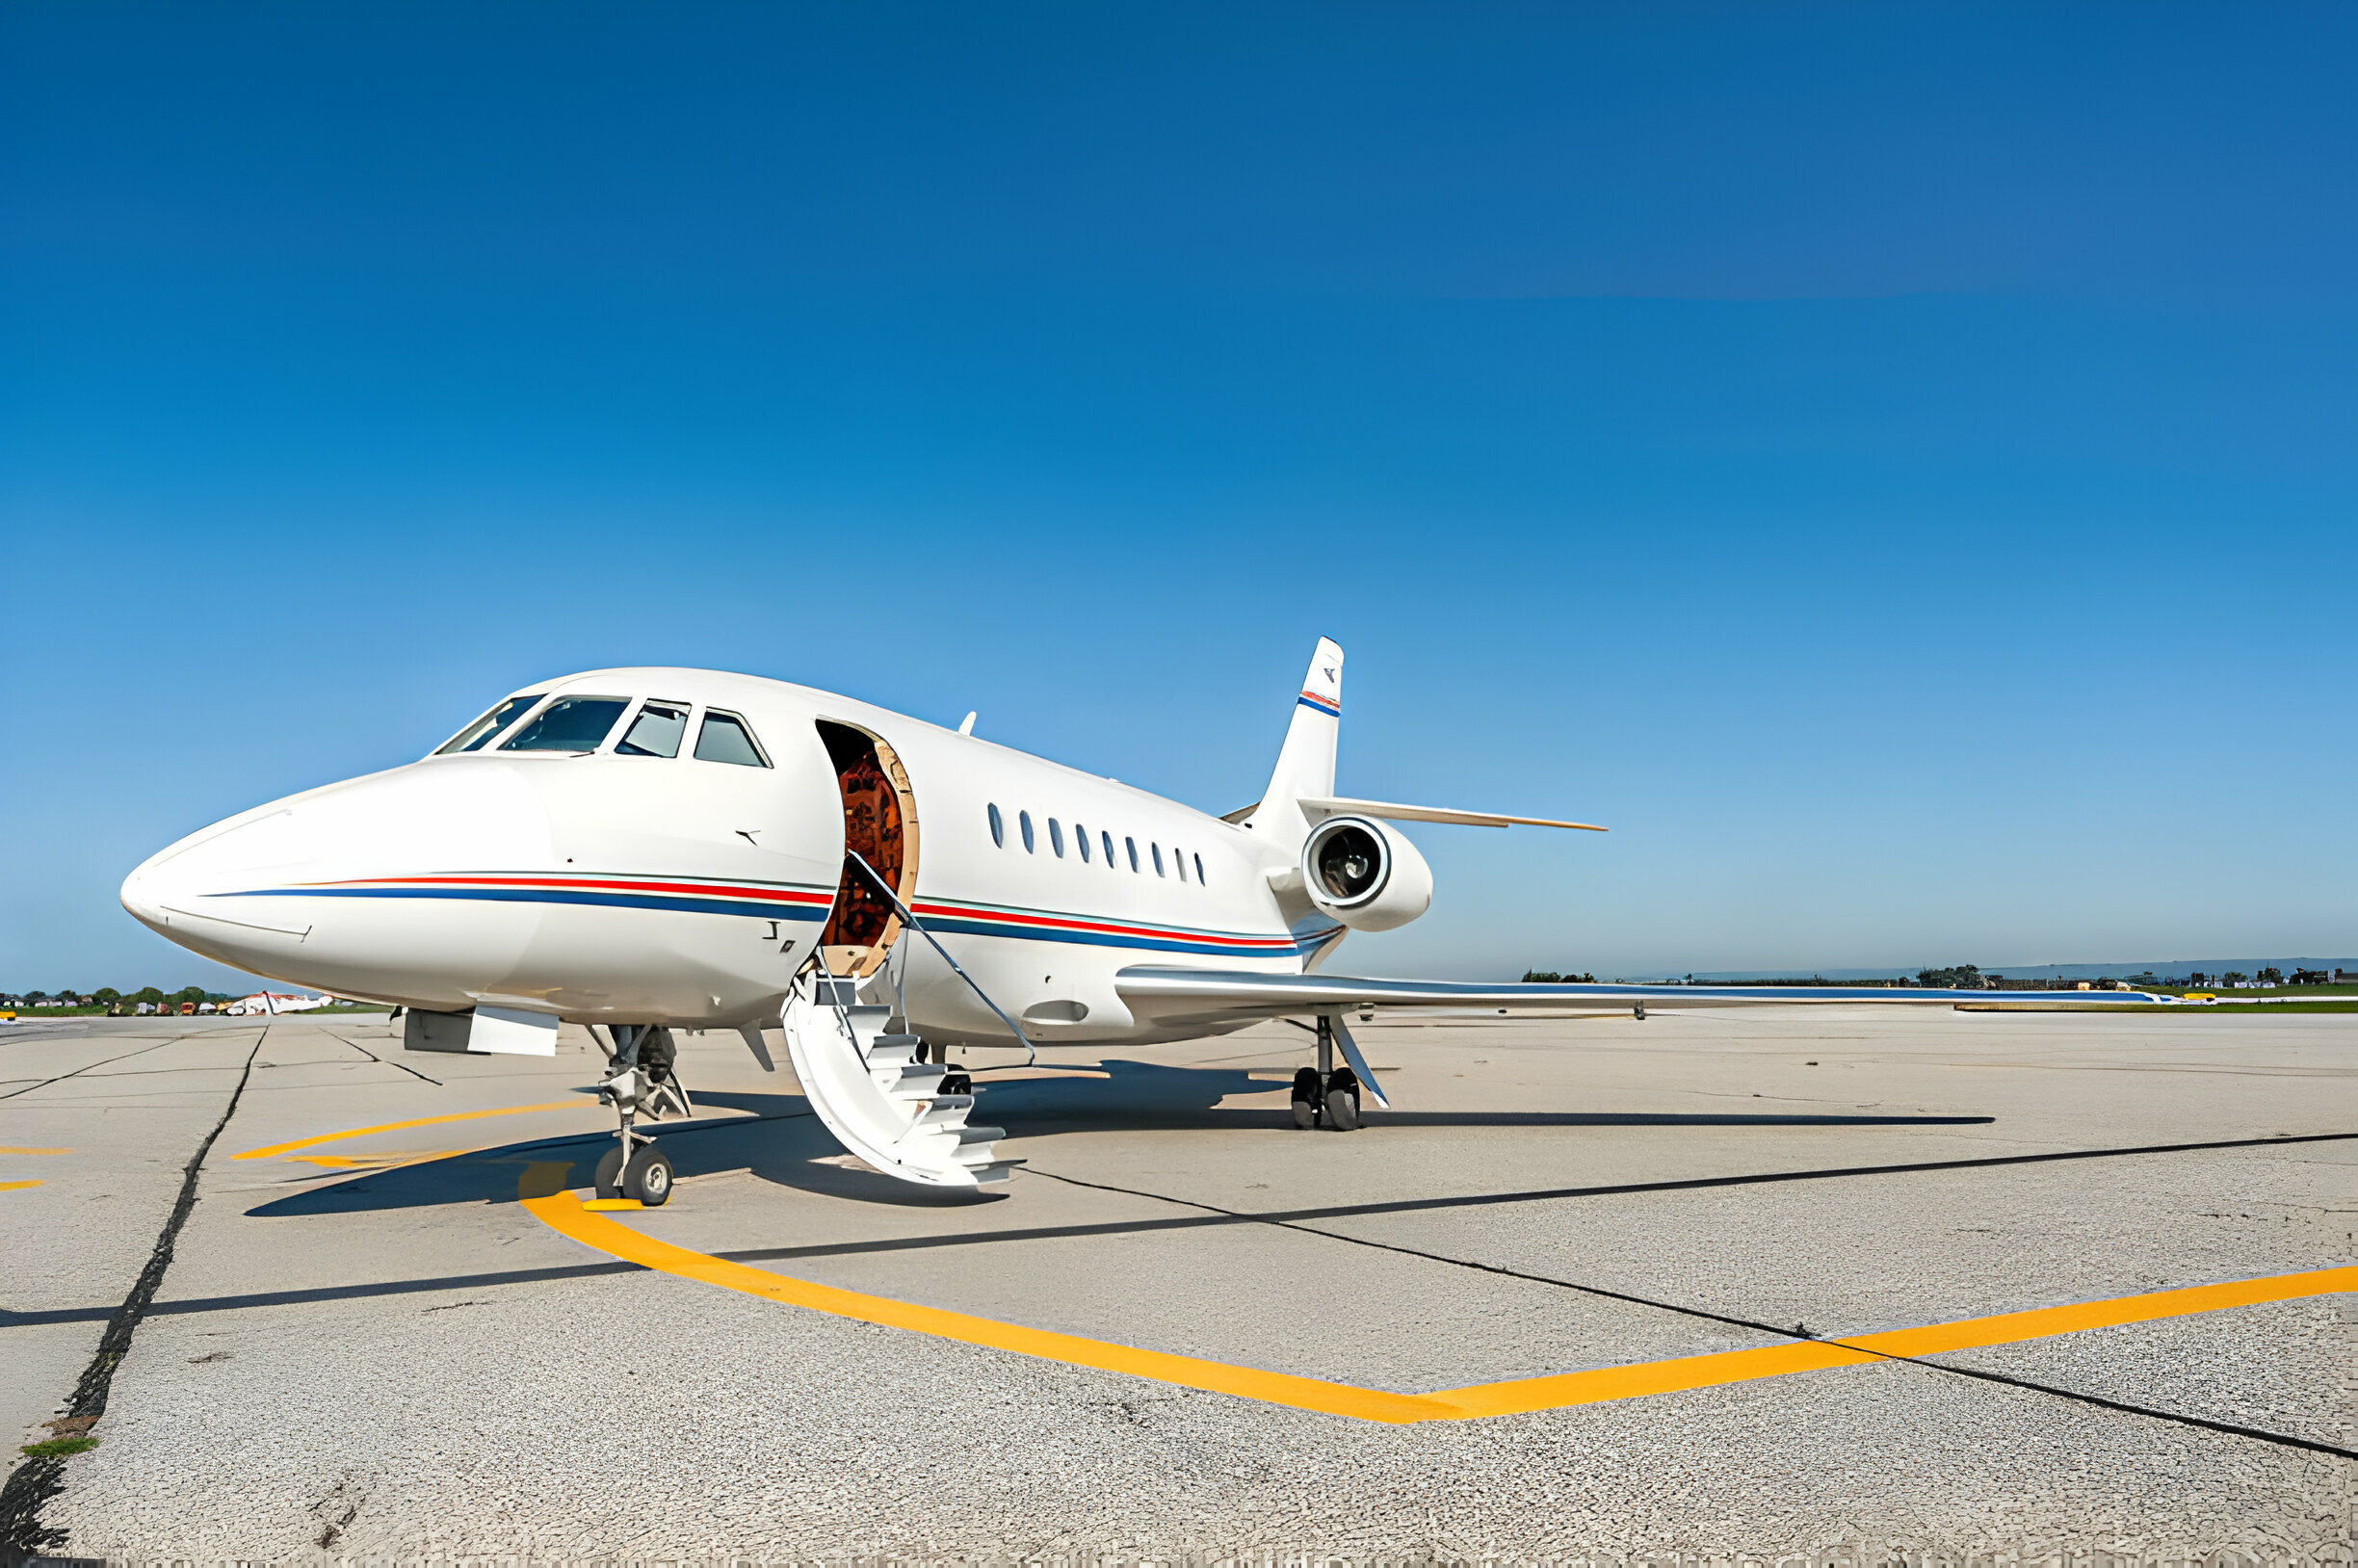 book 8-10 seater private jet Private jet charter service company called FLY AVCARE